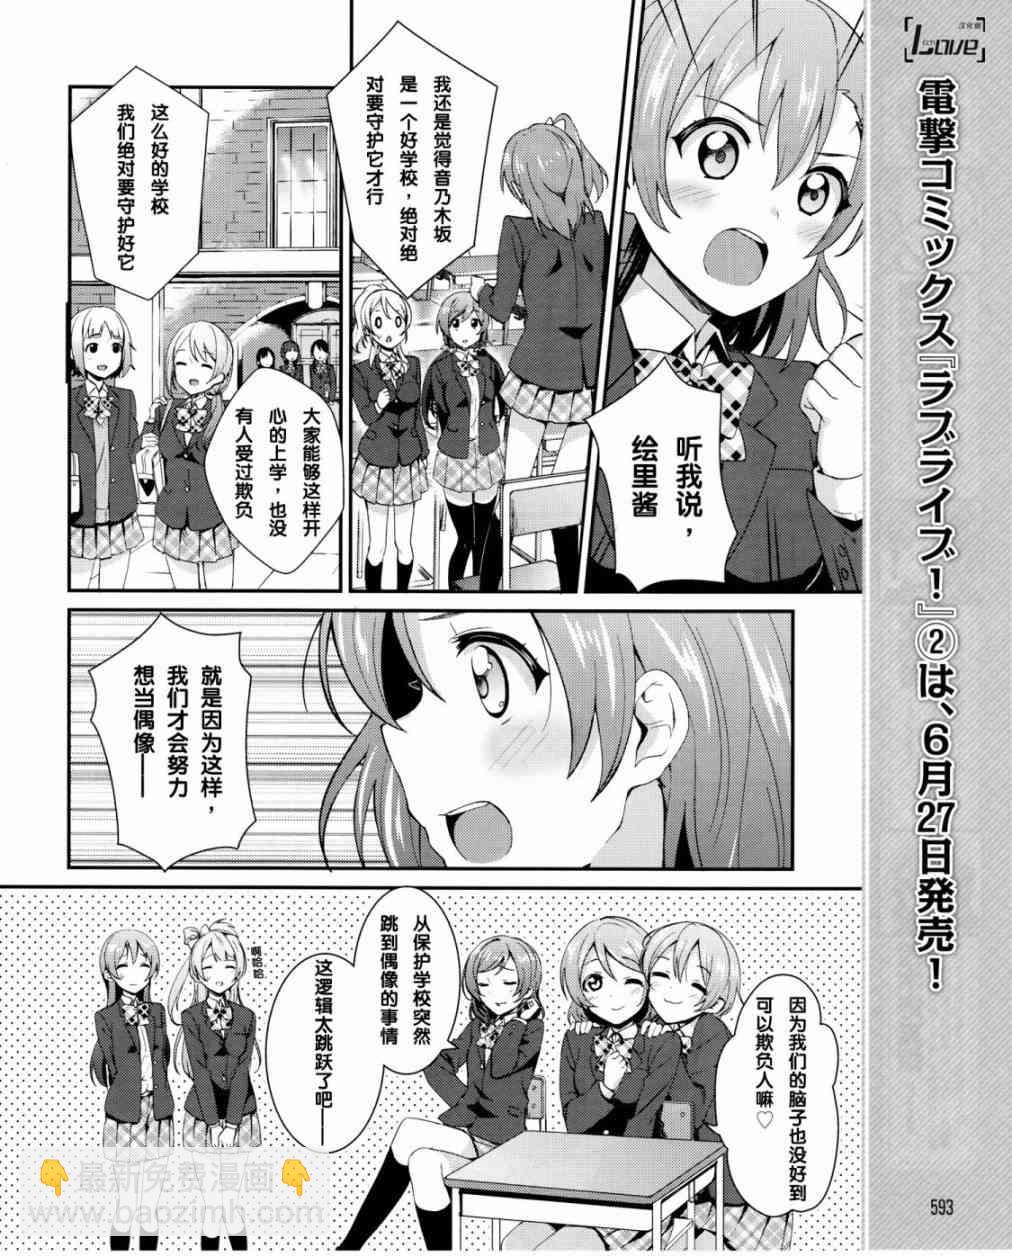 LoveLive - 16話 - 1